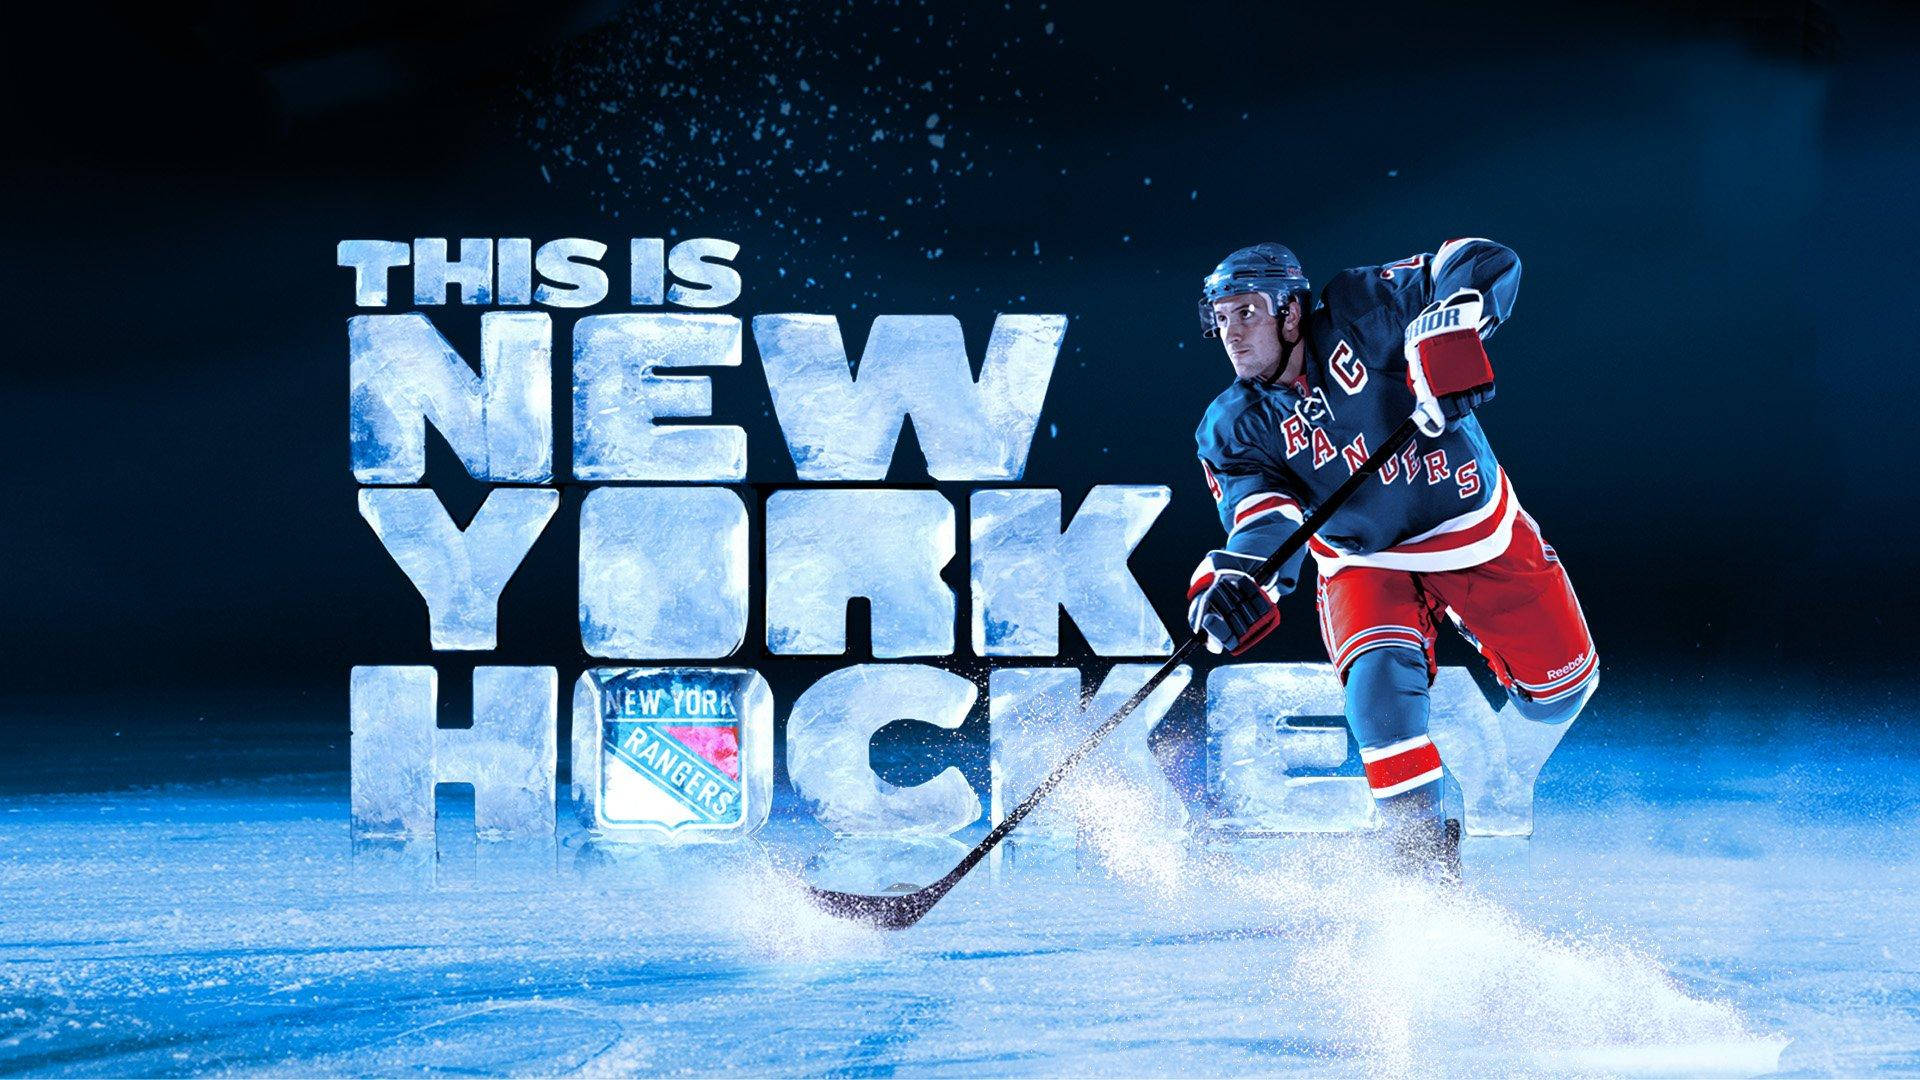 Exciting Ice Hockey Action With The New York Rangers Background